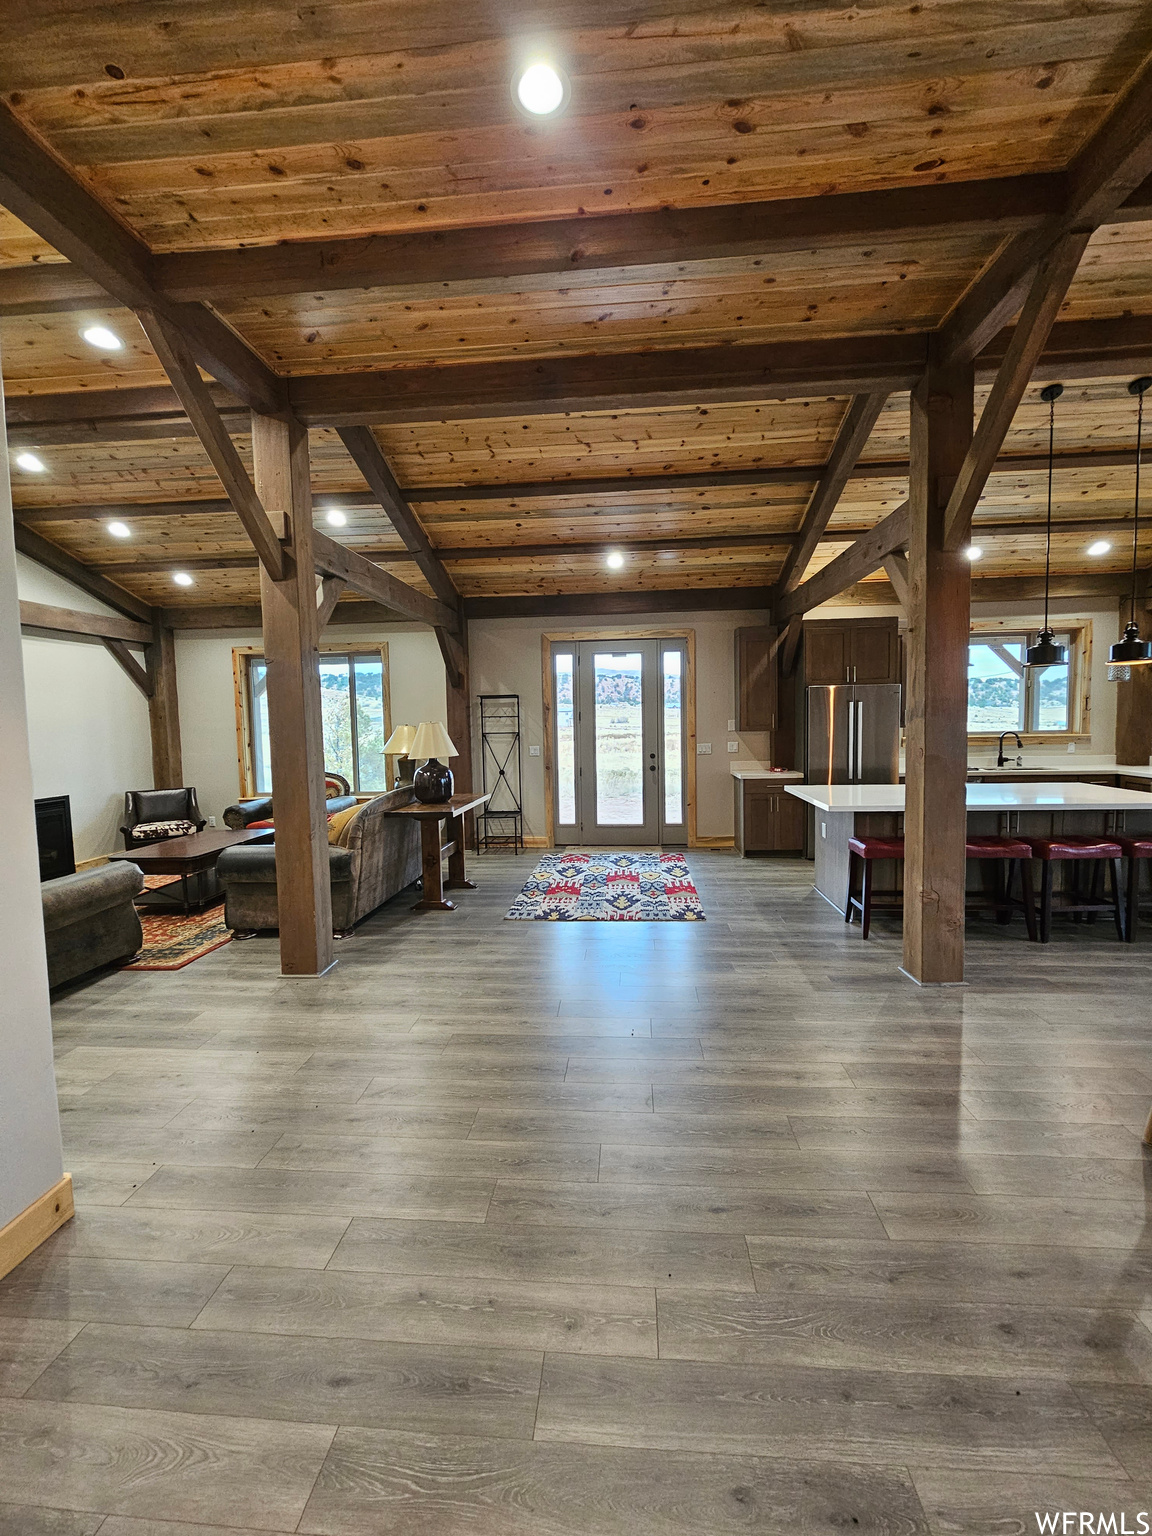 Entry way with wooden beams and beamed ceiling